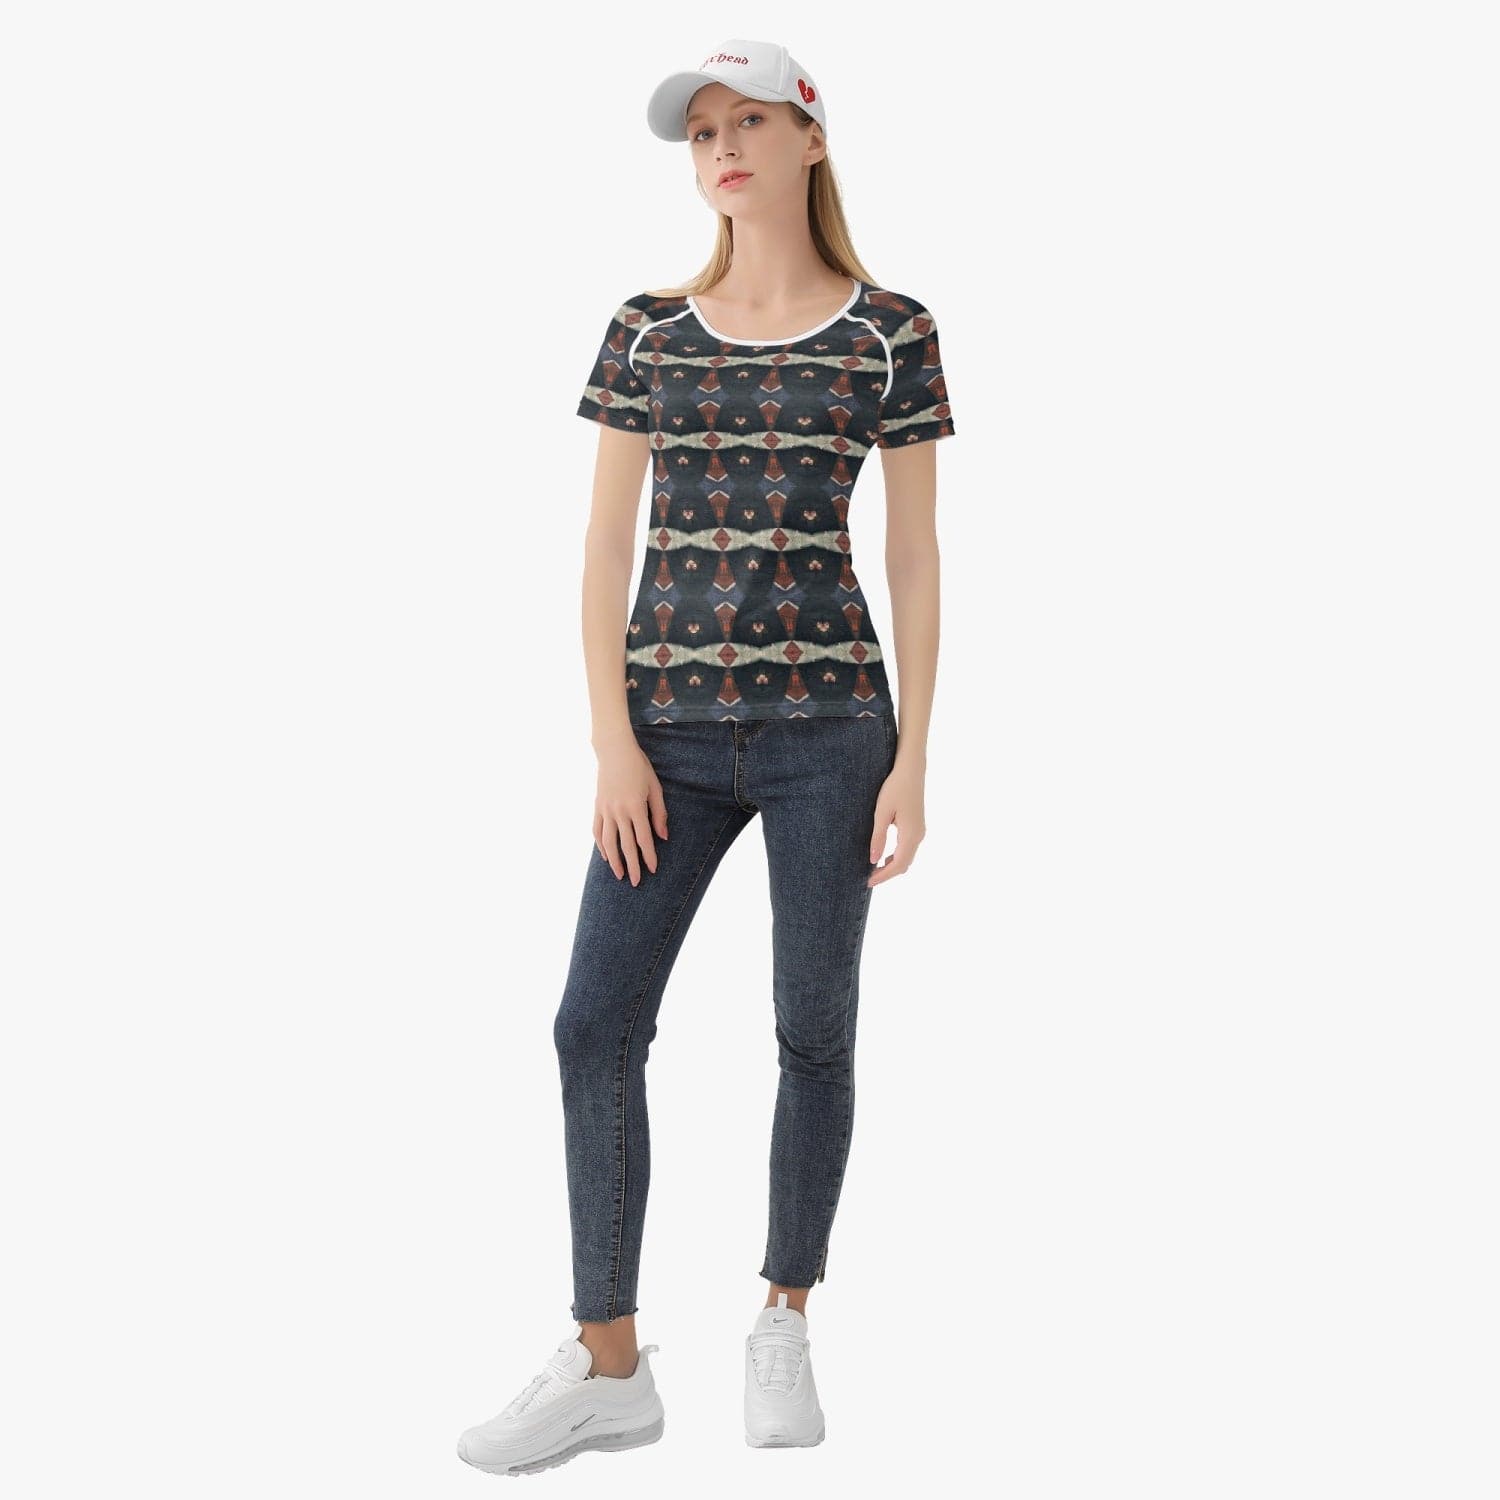 Building the Pillars Black with Subtle Red and Gold Patterned, Handmade Hot Women T-shirt Sports/ Yoga Top, by Sensus Studio Design